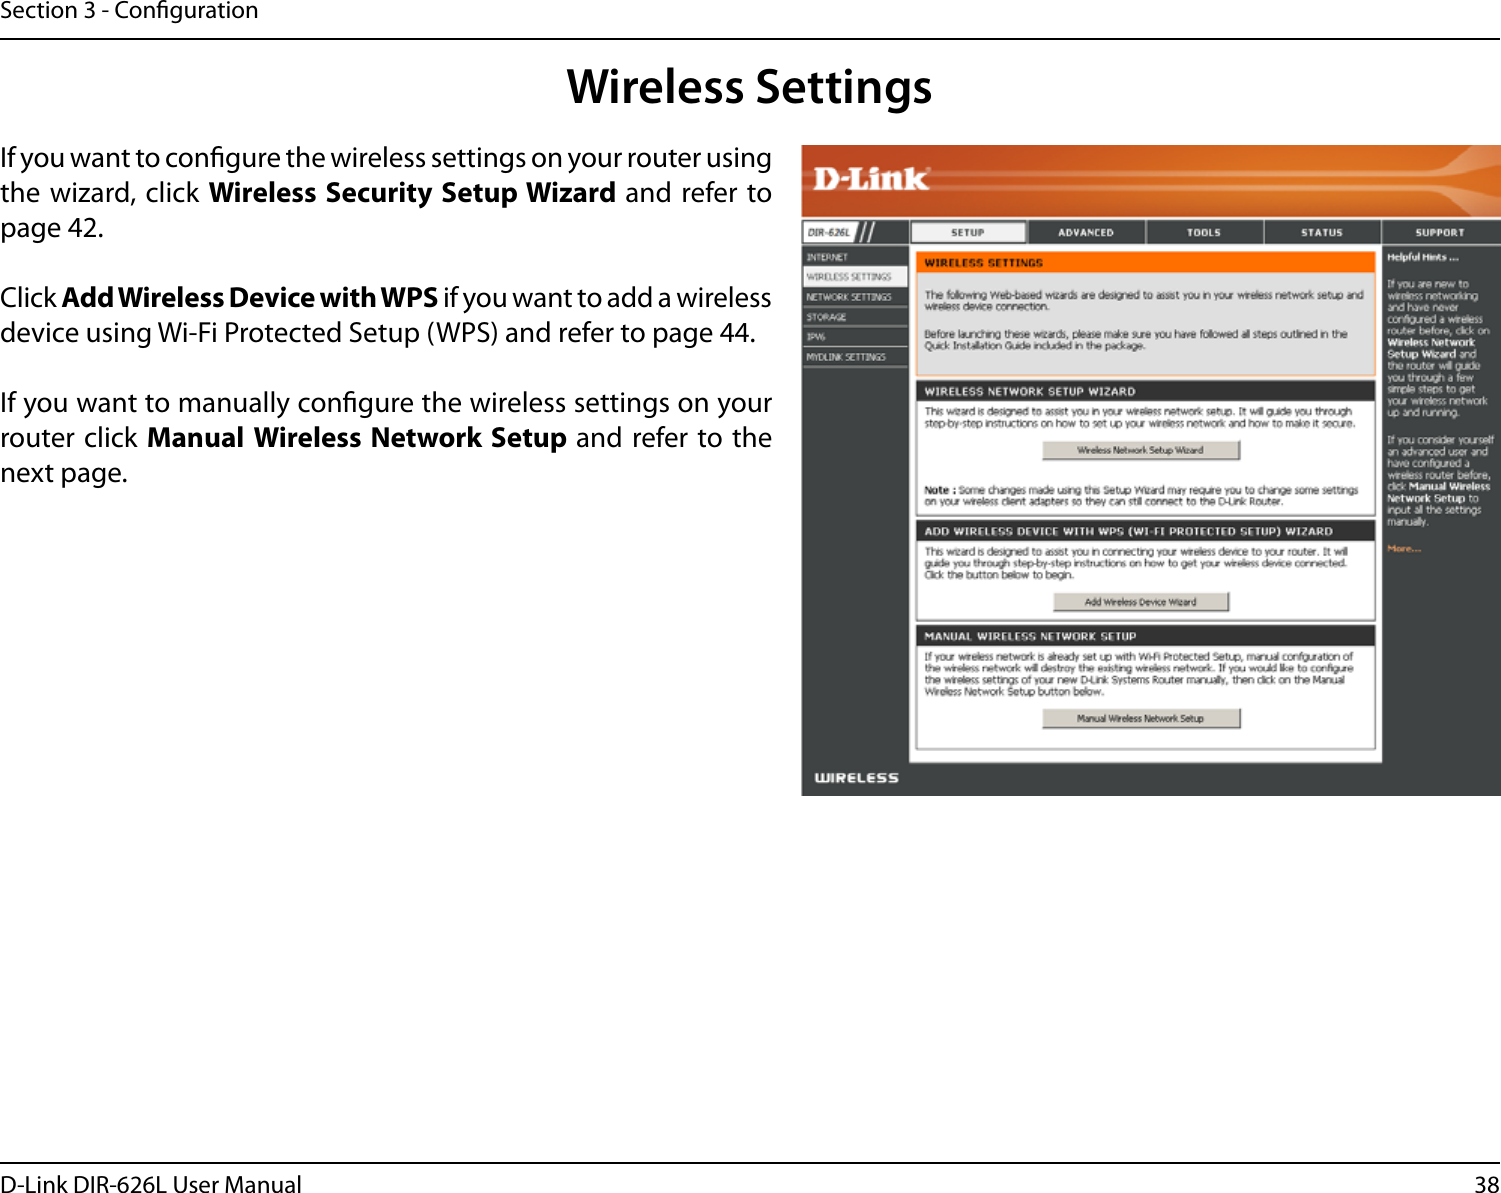 38D-Link DIR-626L User ManualSection 3 - CongurationWireless SettingsIf you want to congure the wireless settings on your router using the wizard, click Wireless Security Setup Wizard and refer to page 42.Click Add Wireless Device with WPS if you want to add a wireless device using Wi-Fi Protected Setup (WPS) and refer to page 44.If you want to manually congure the wireless settings on your router click Manual Wireless Network Setup and refer to the next page.